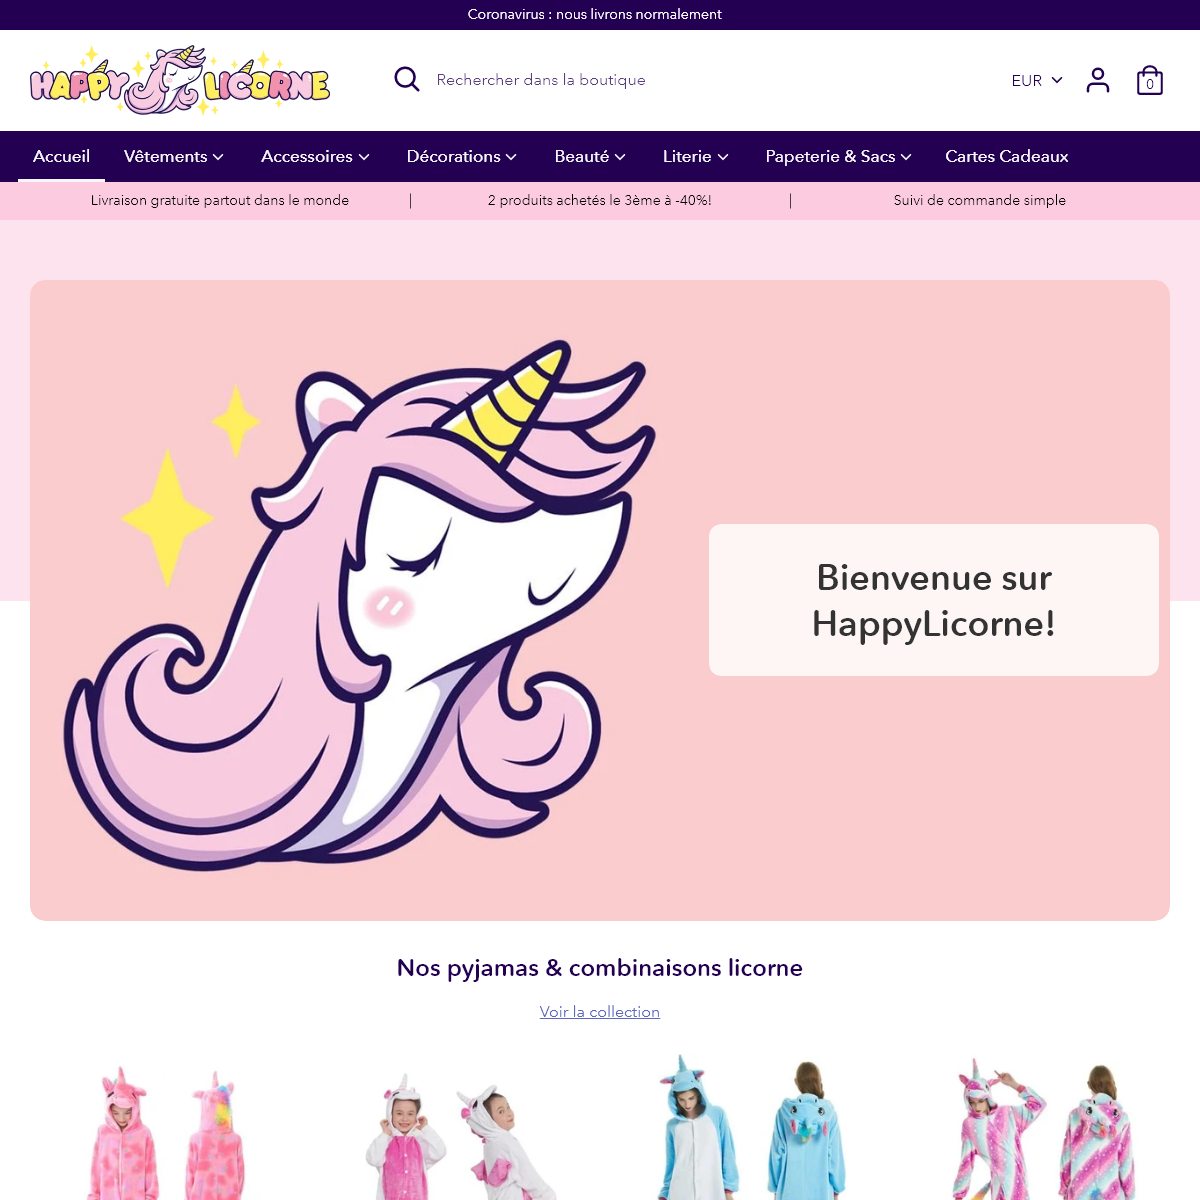 A complete backup of happylicorne.fr